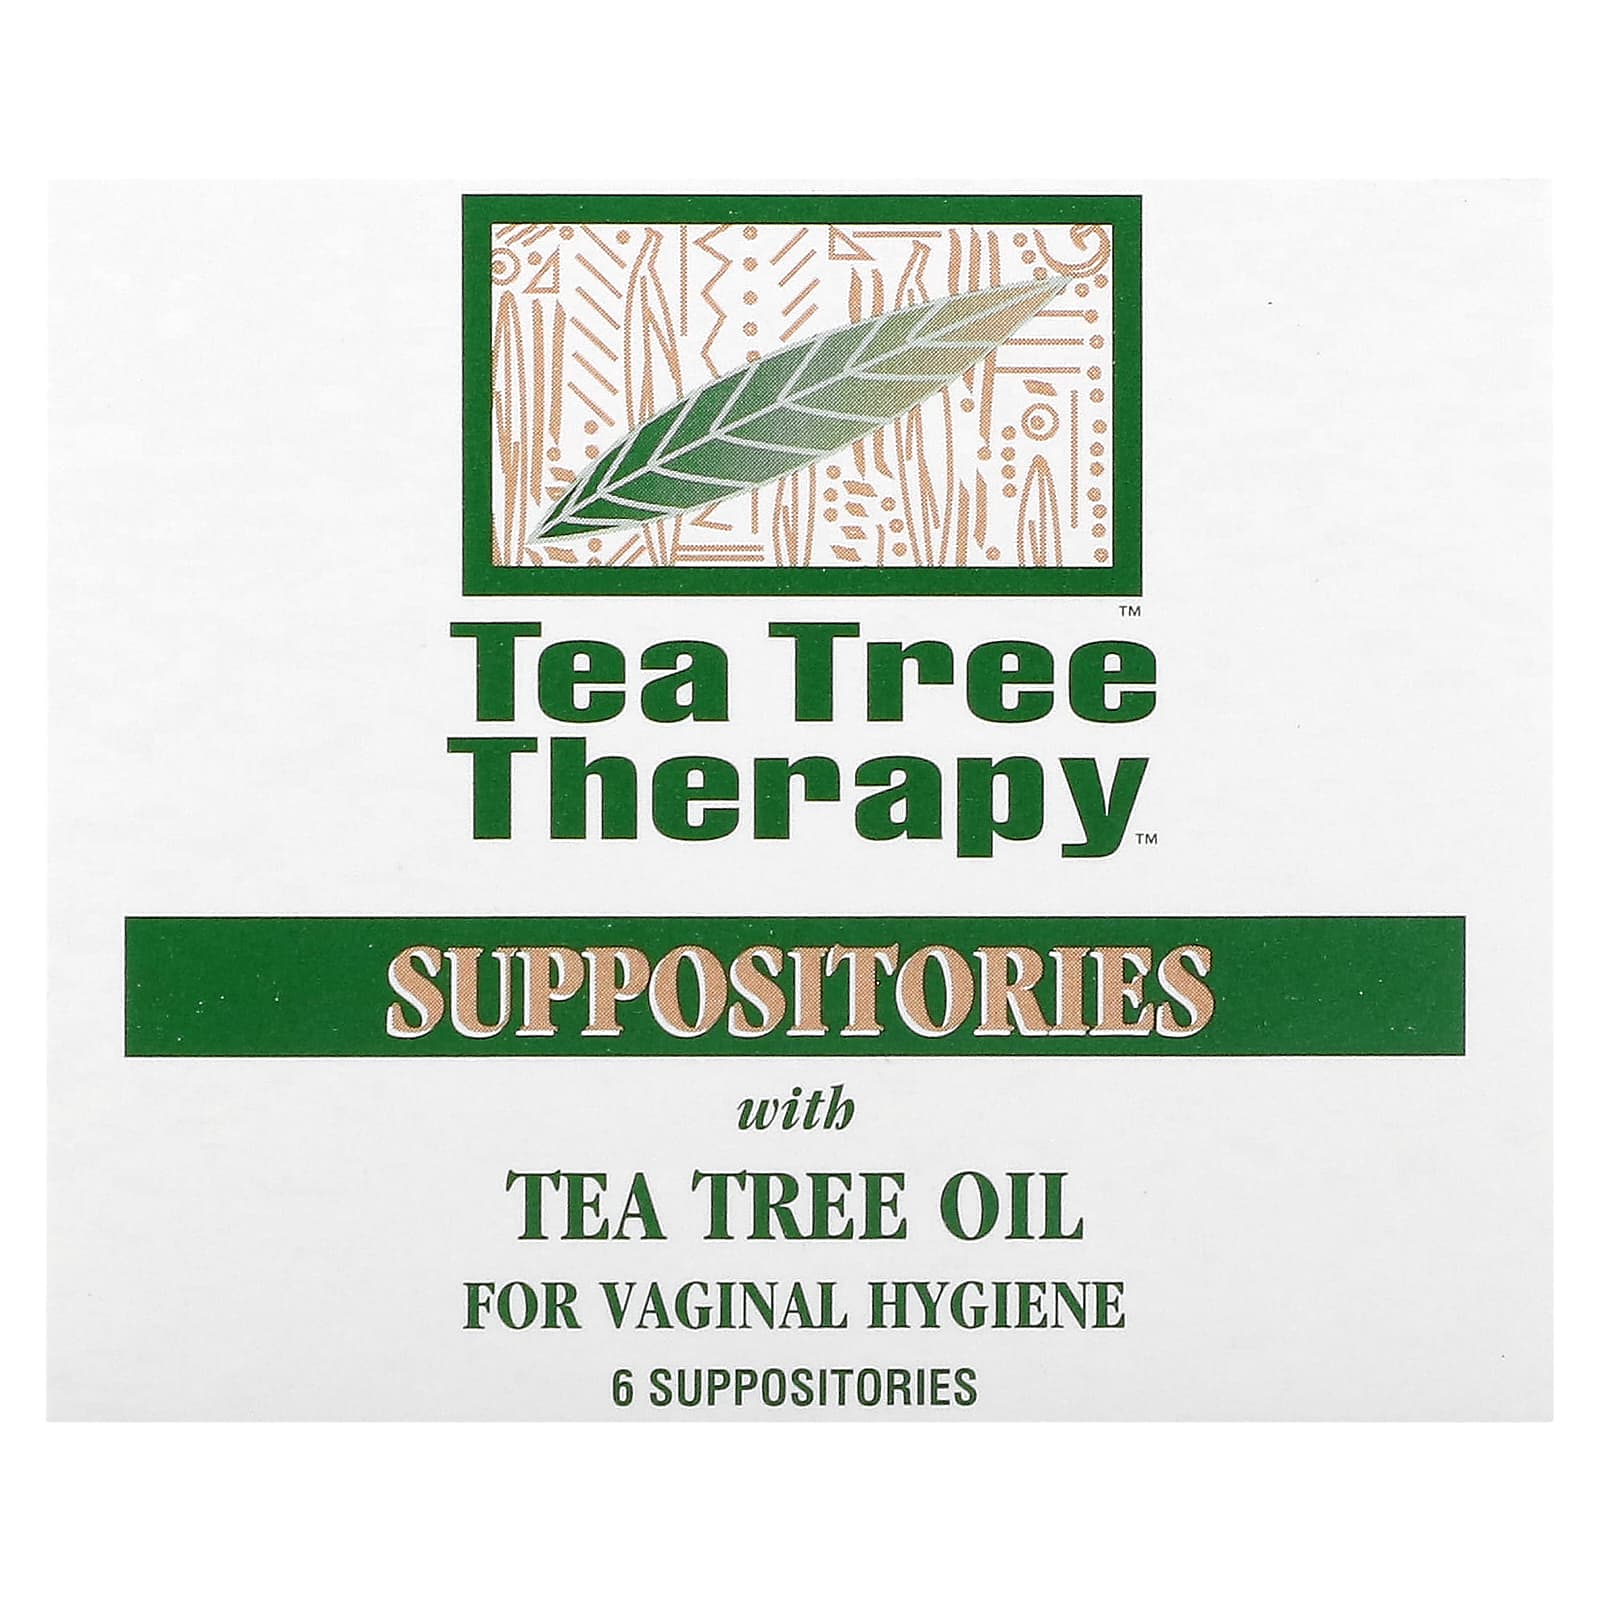 Tea Tree Therapy-Suppositories with Tea Tree Oil for Vaginal Hygiene-6 Suppositories